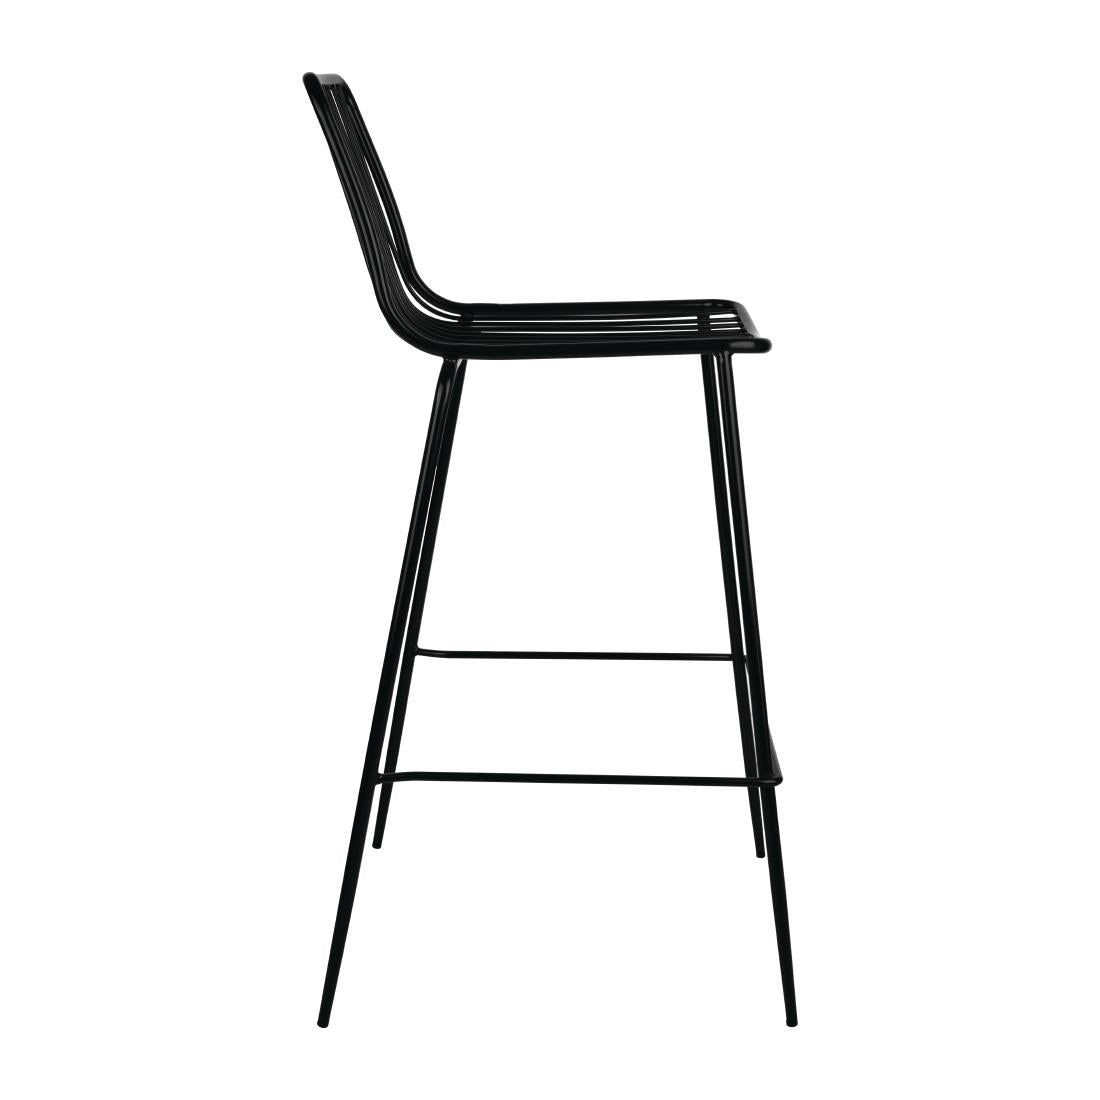 Bolero Steel Wire High Stools (Pack of 4) JD Catering Equipment Solutions Ltd